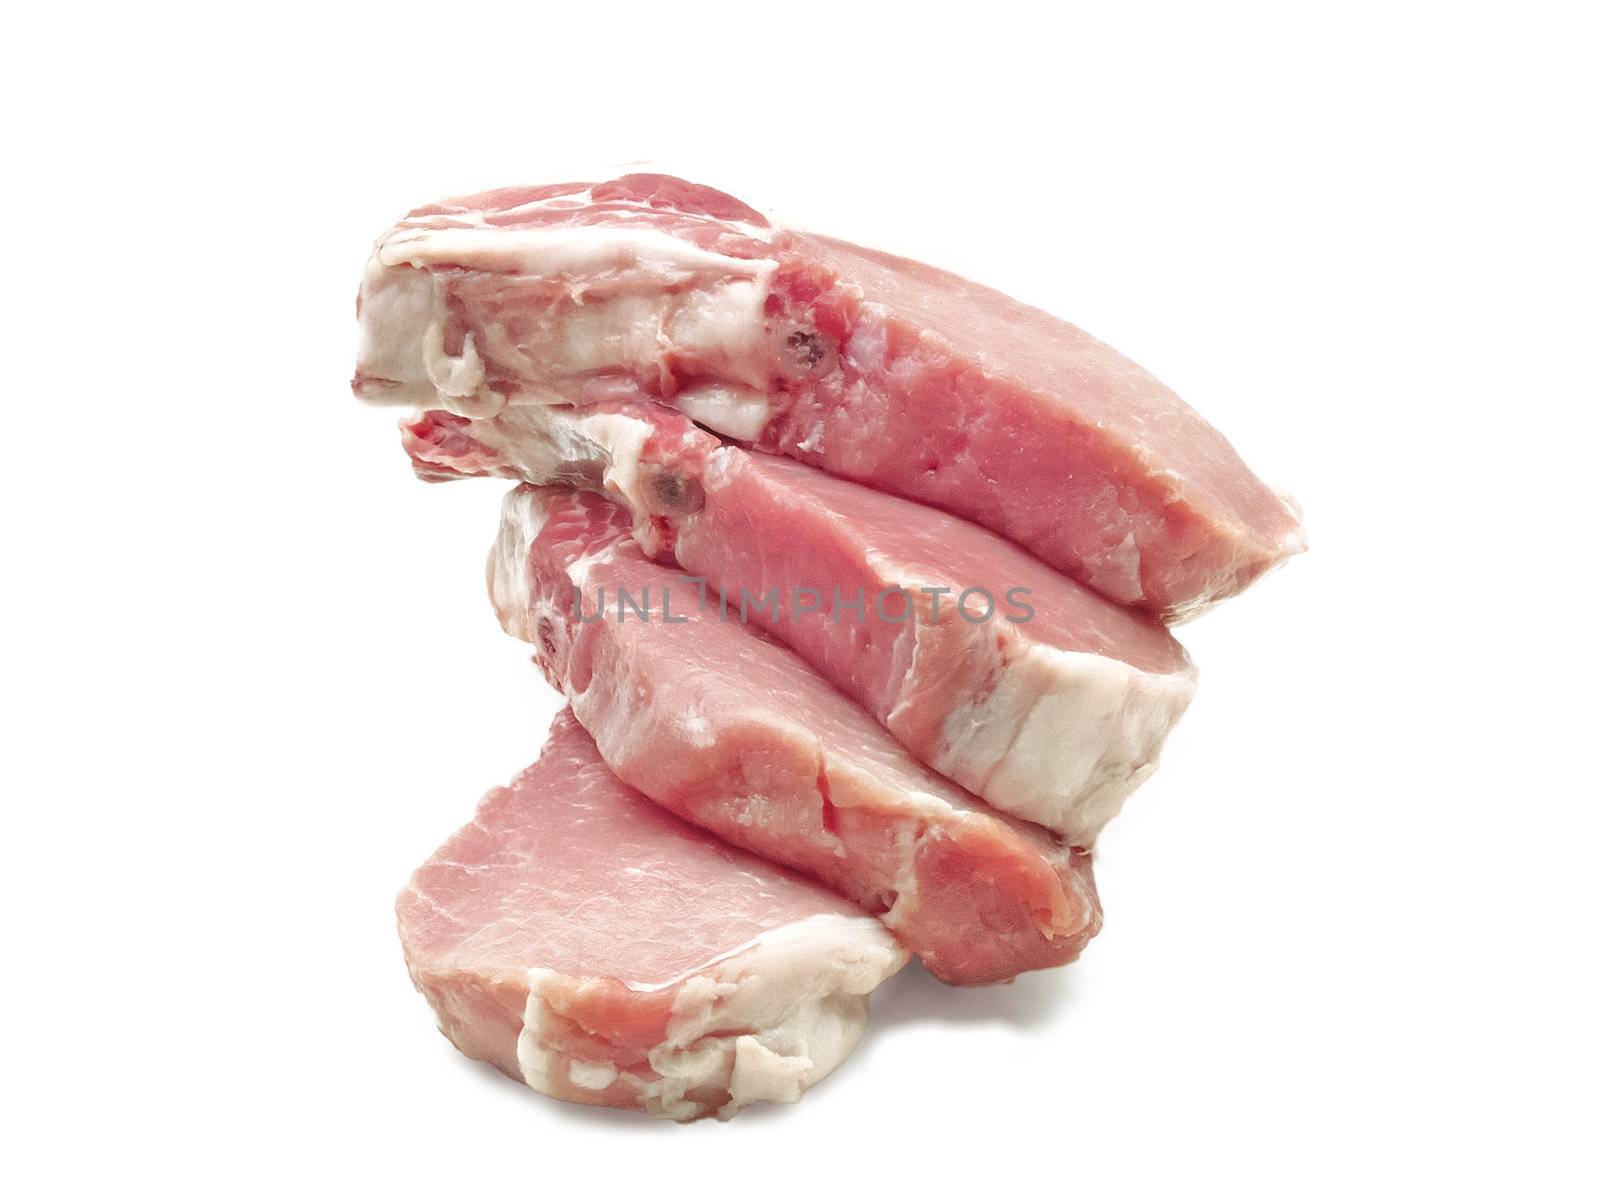 Some pork chops on a white background by NickNick